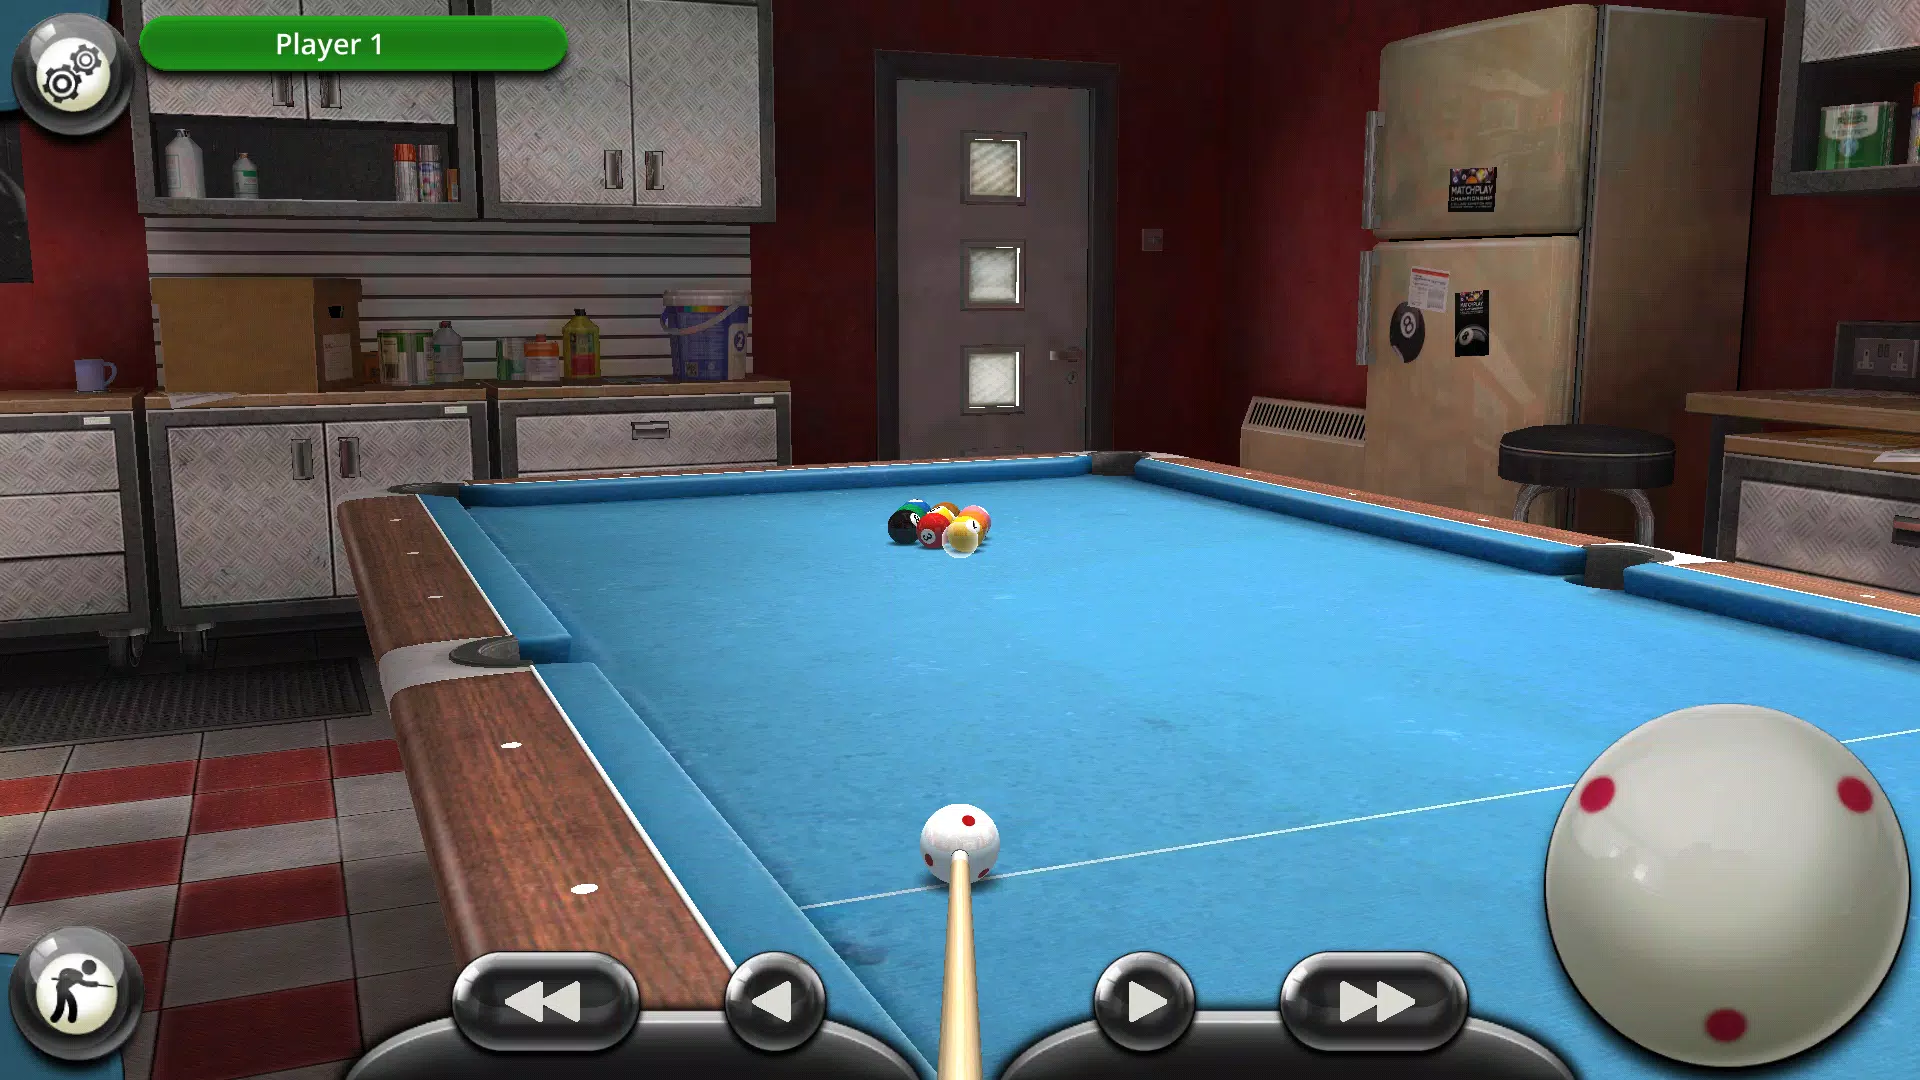 8 Ball Pool 3.12.4 (1309) APK Download - AndroidAPKsFree